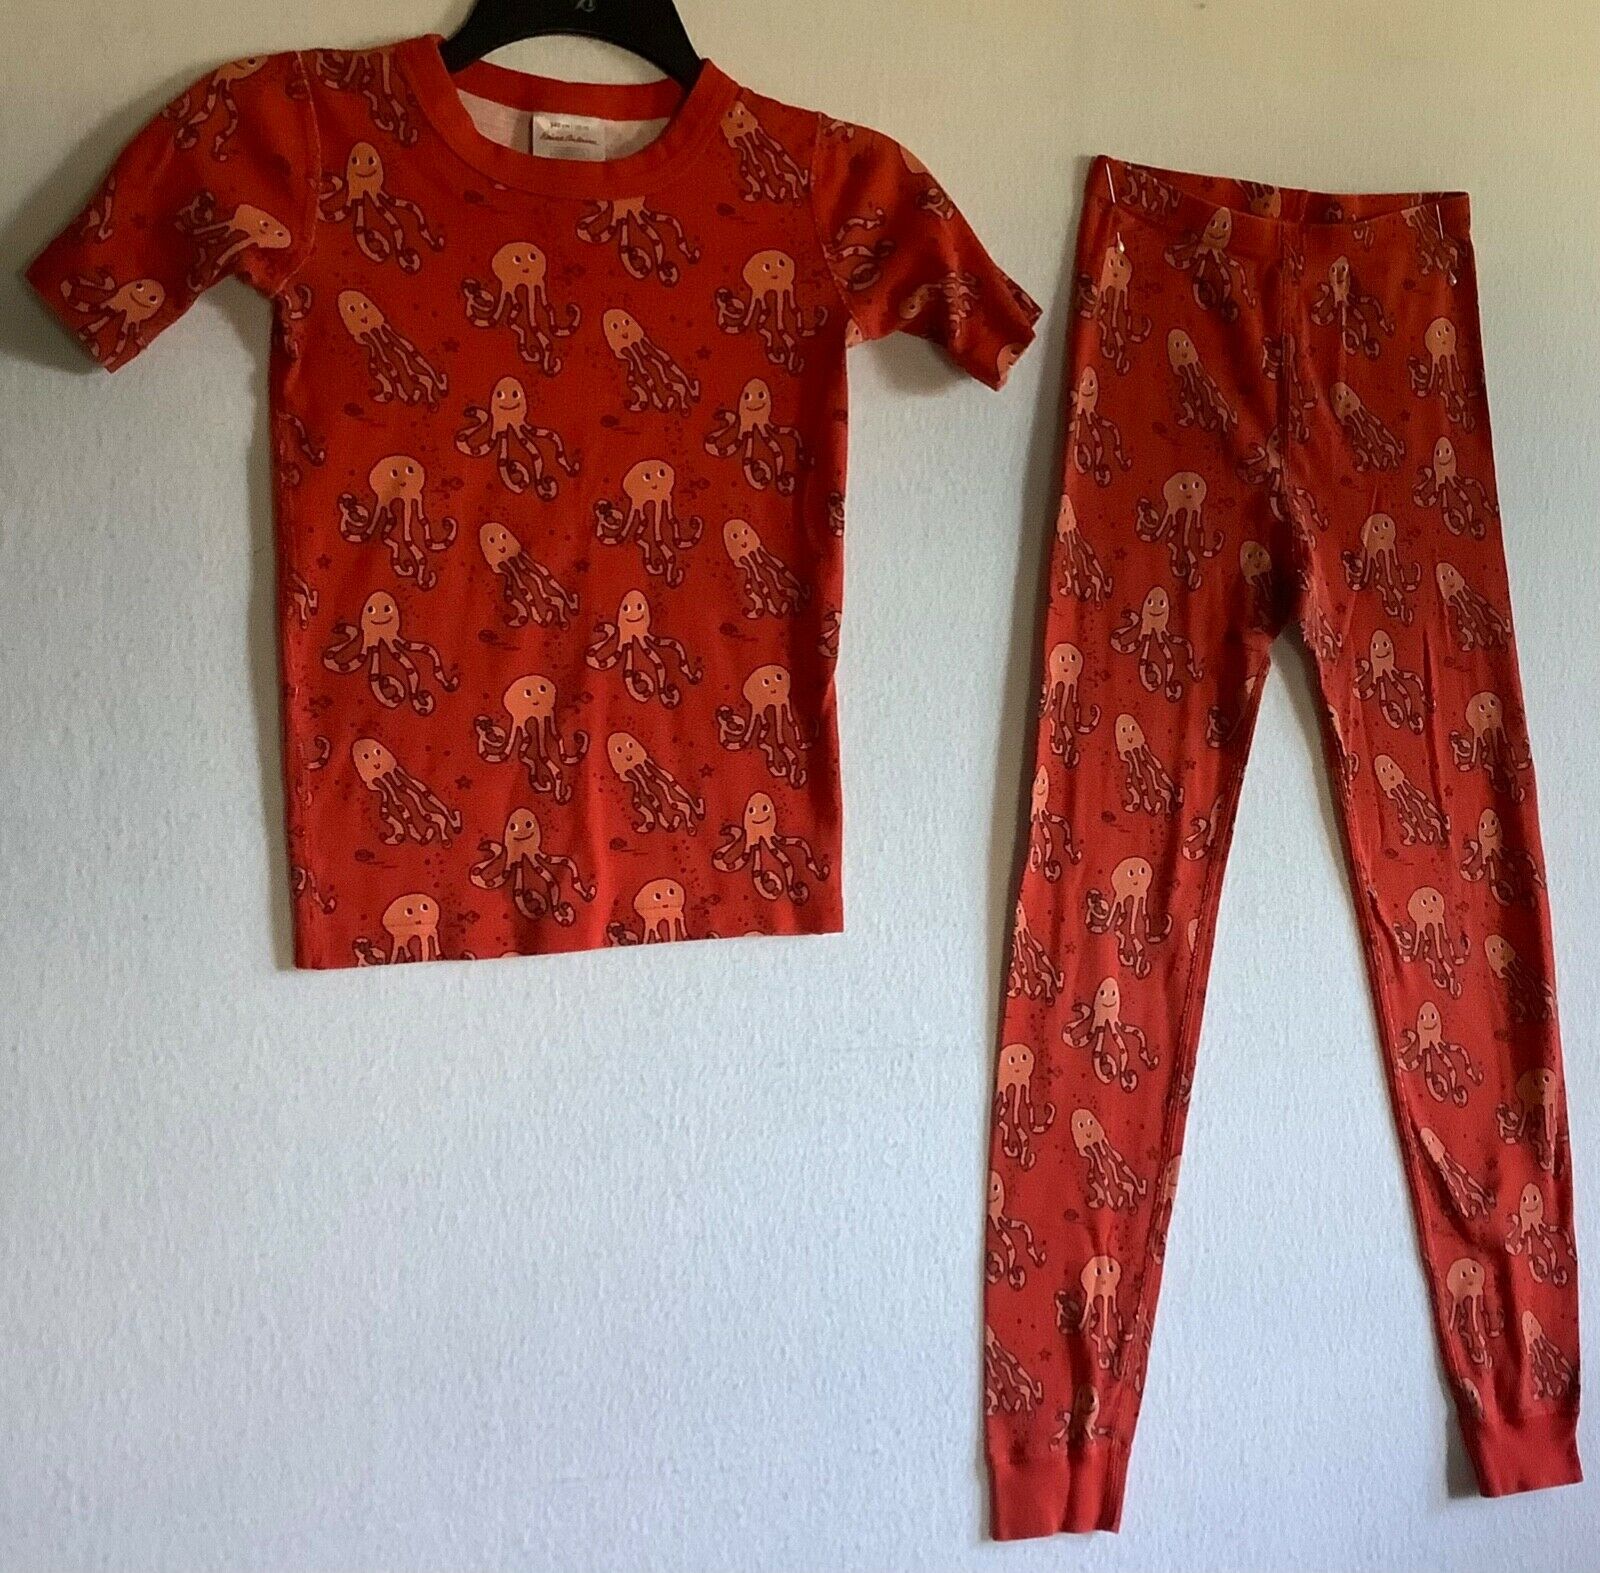 Hanna Andersson Kids Orange With Octopus Pajamas - Size 10 Or 140cm Excellent!